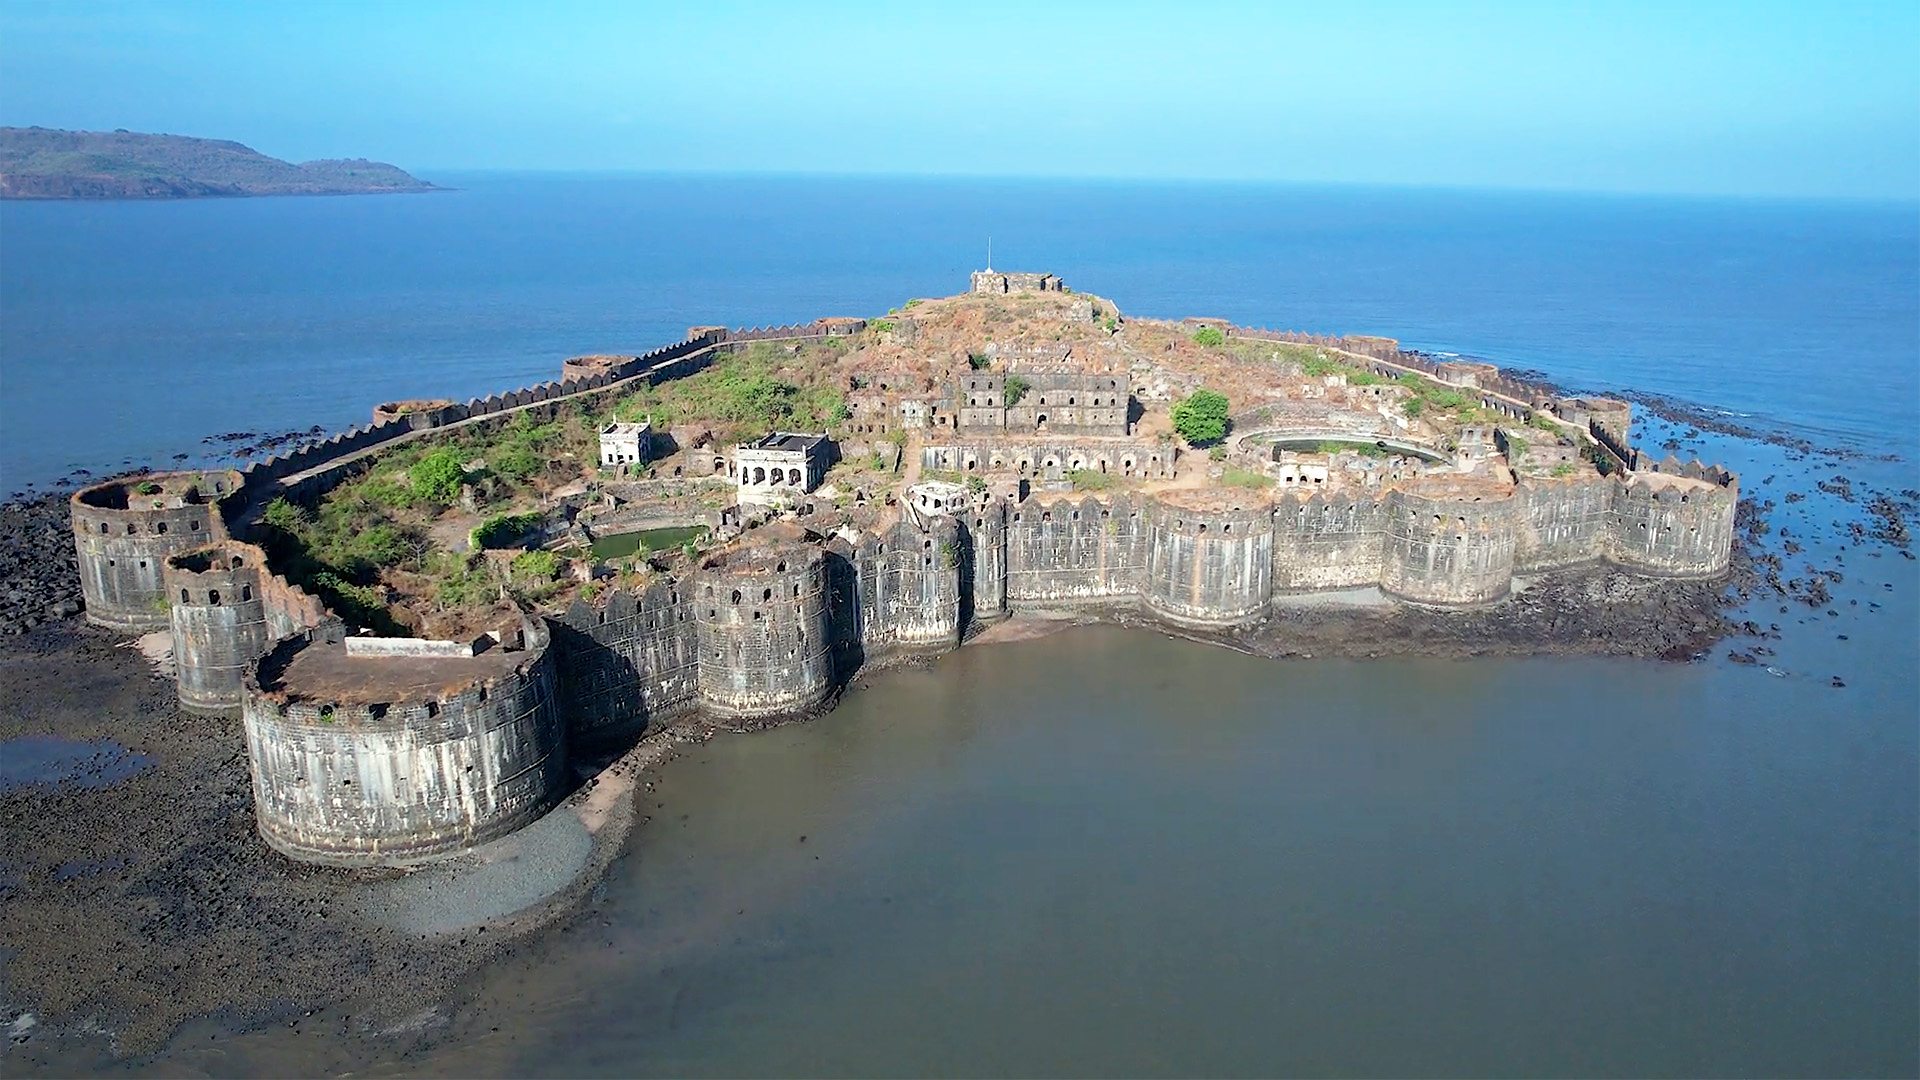 An aerial shot of the Murud-Janjira fort on India's west coast.